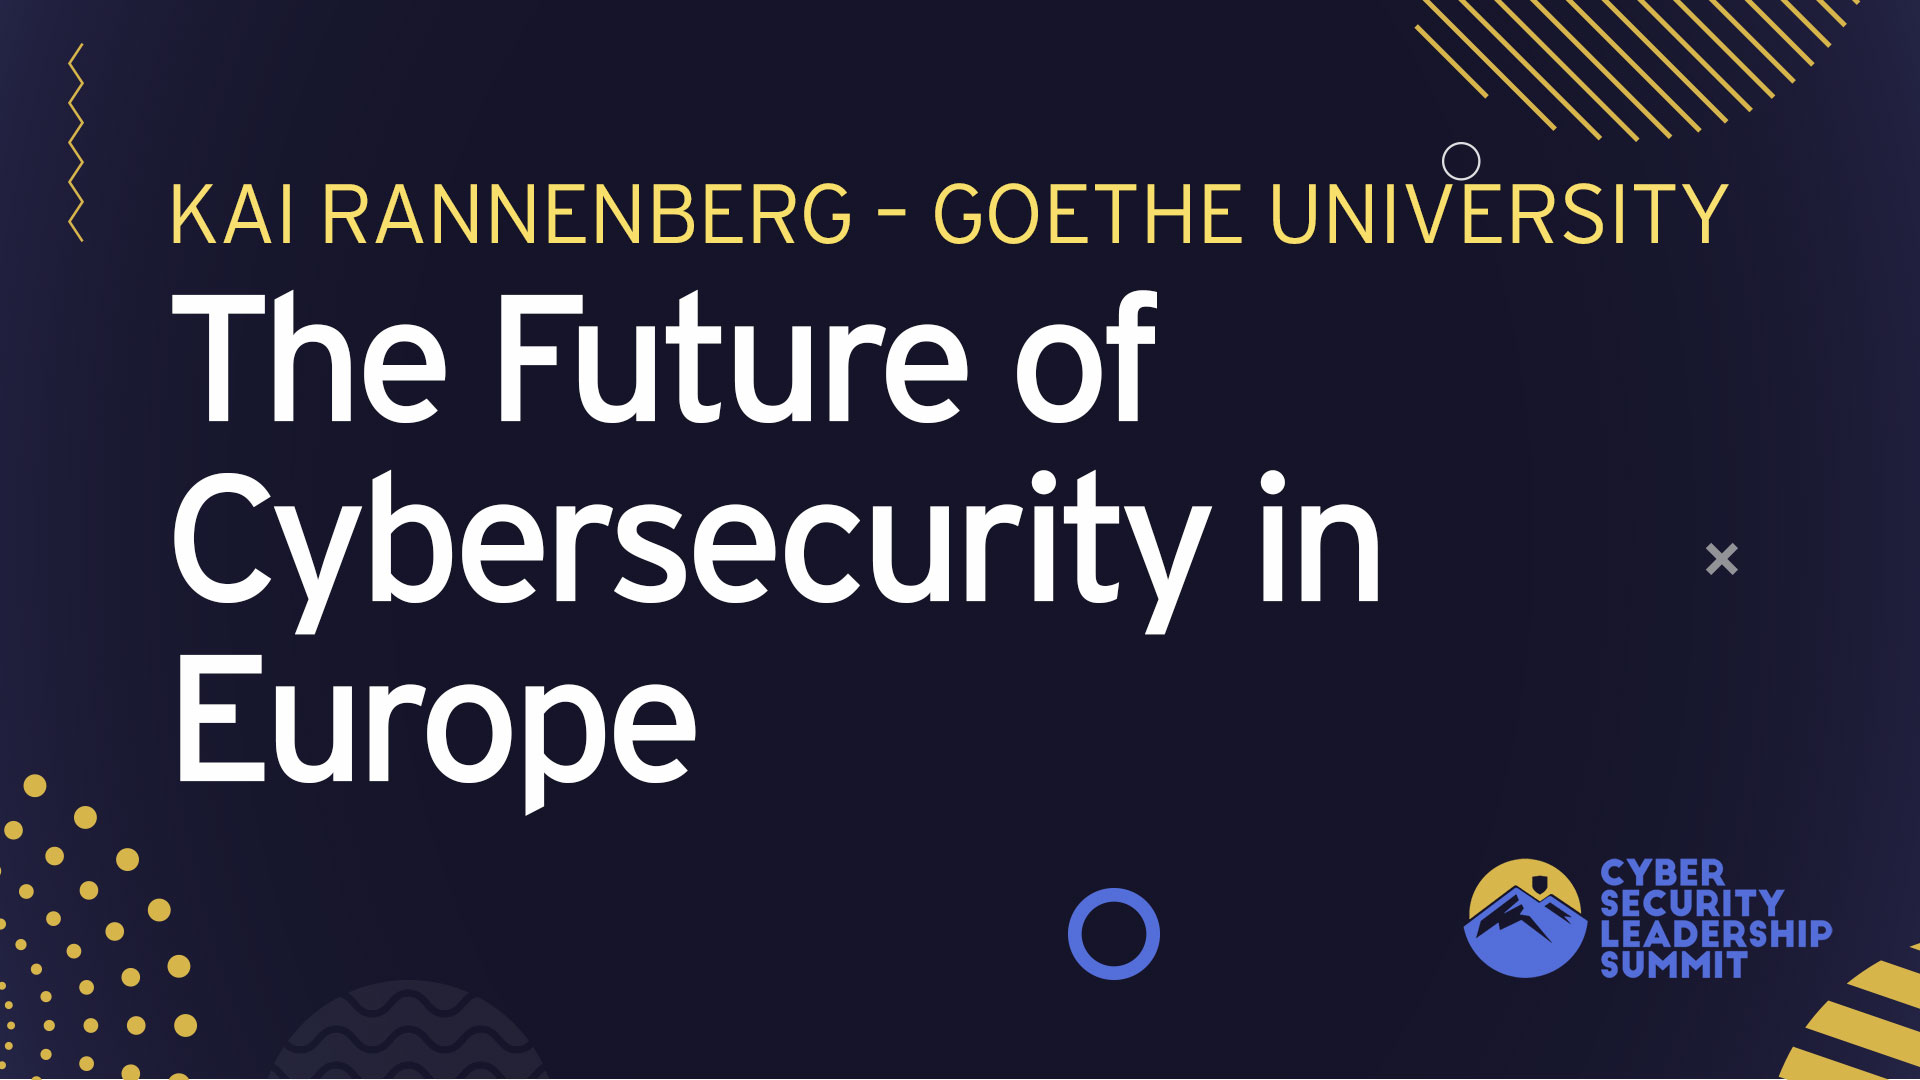 The European Cybersecurity Competence Center (ECCC) and the Future of Cybersecurity in Europe